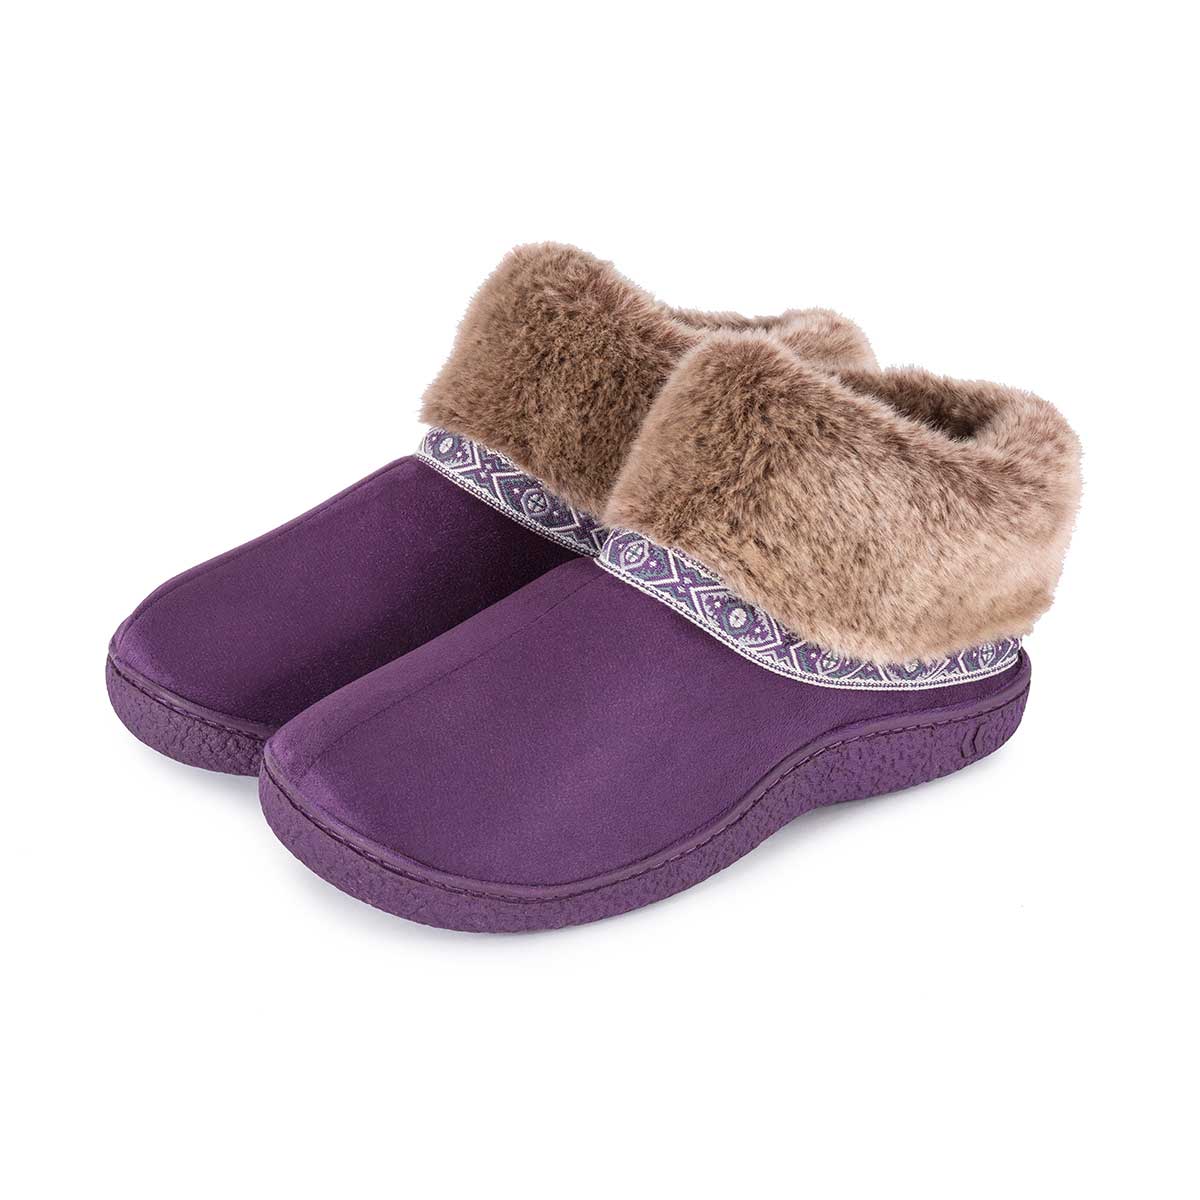 Isotoner Ladies Pillowstep Bootie Slippers with Fur Cuff | eBay